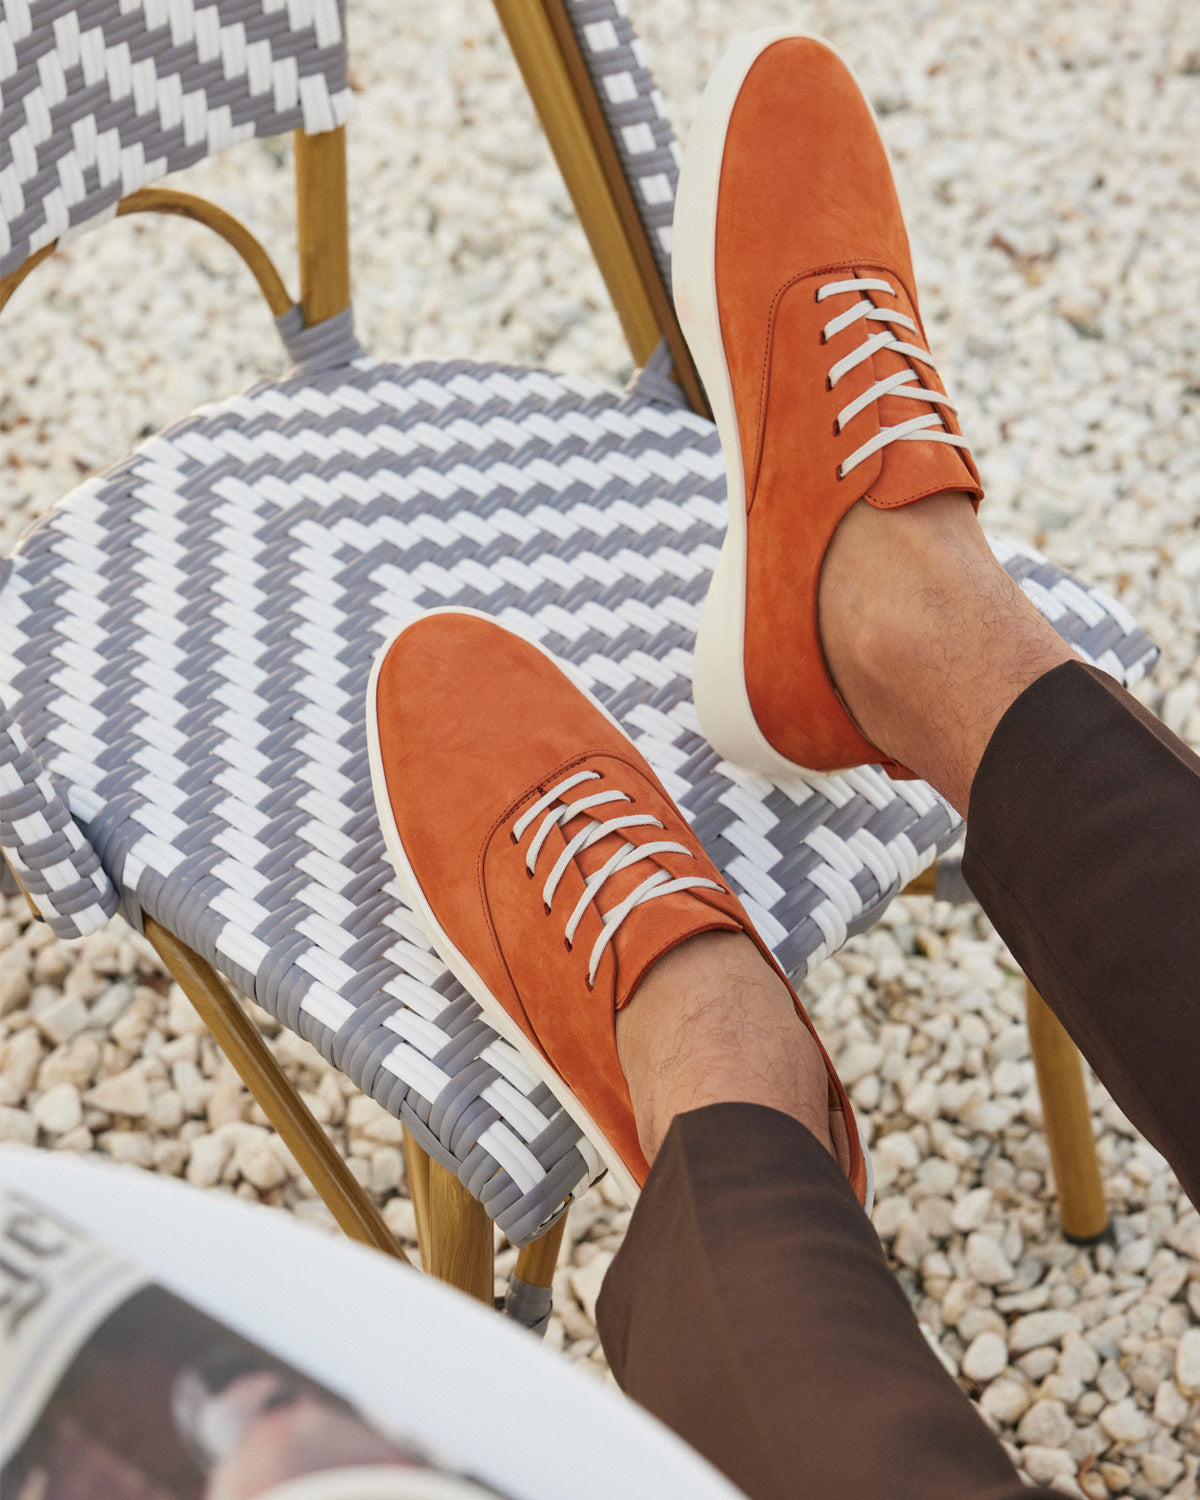 Orange, leather shoes resting on top of a blue and white woven chair on rocks at a cafe. 